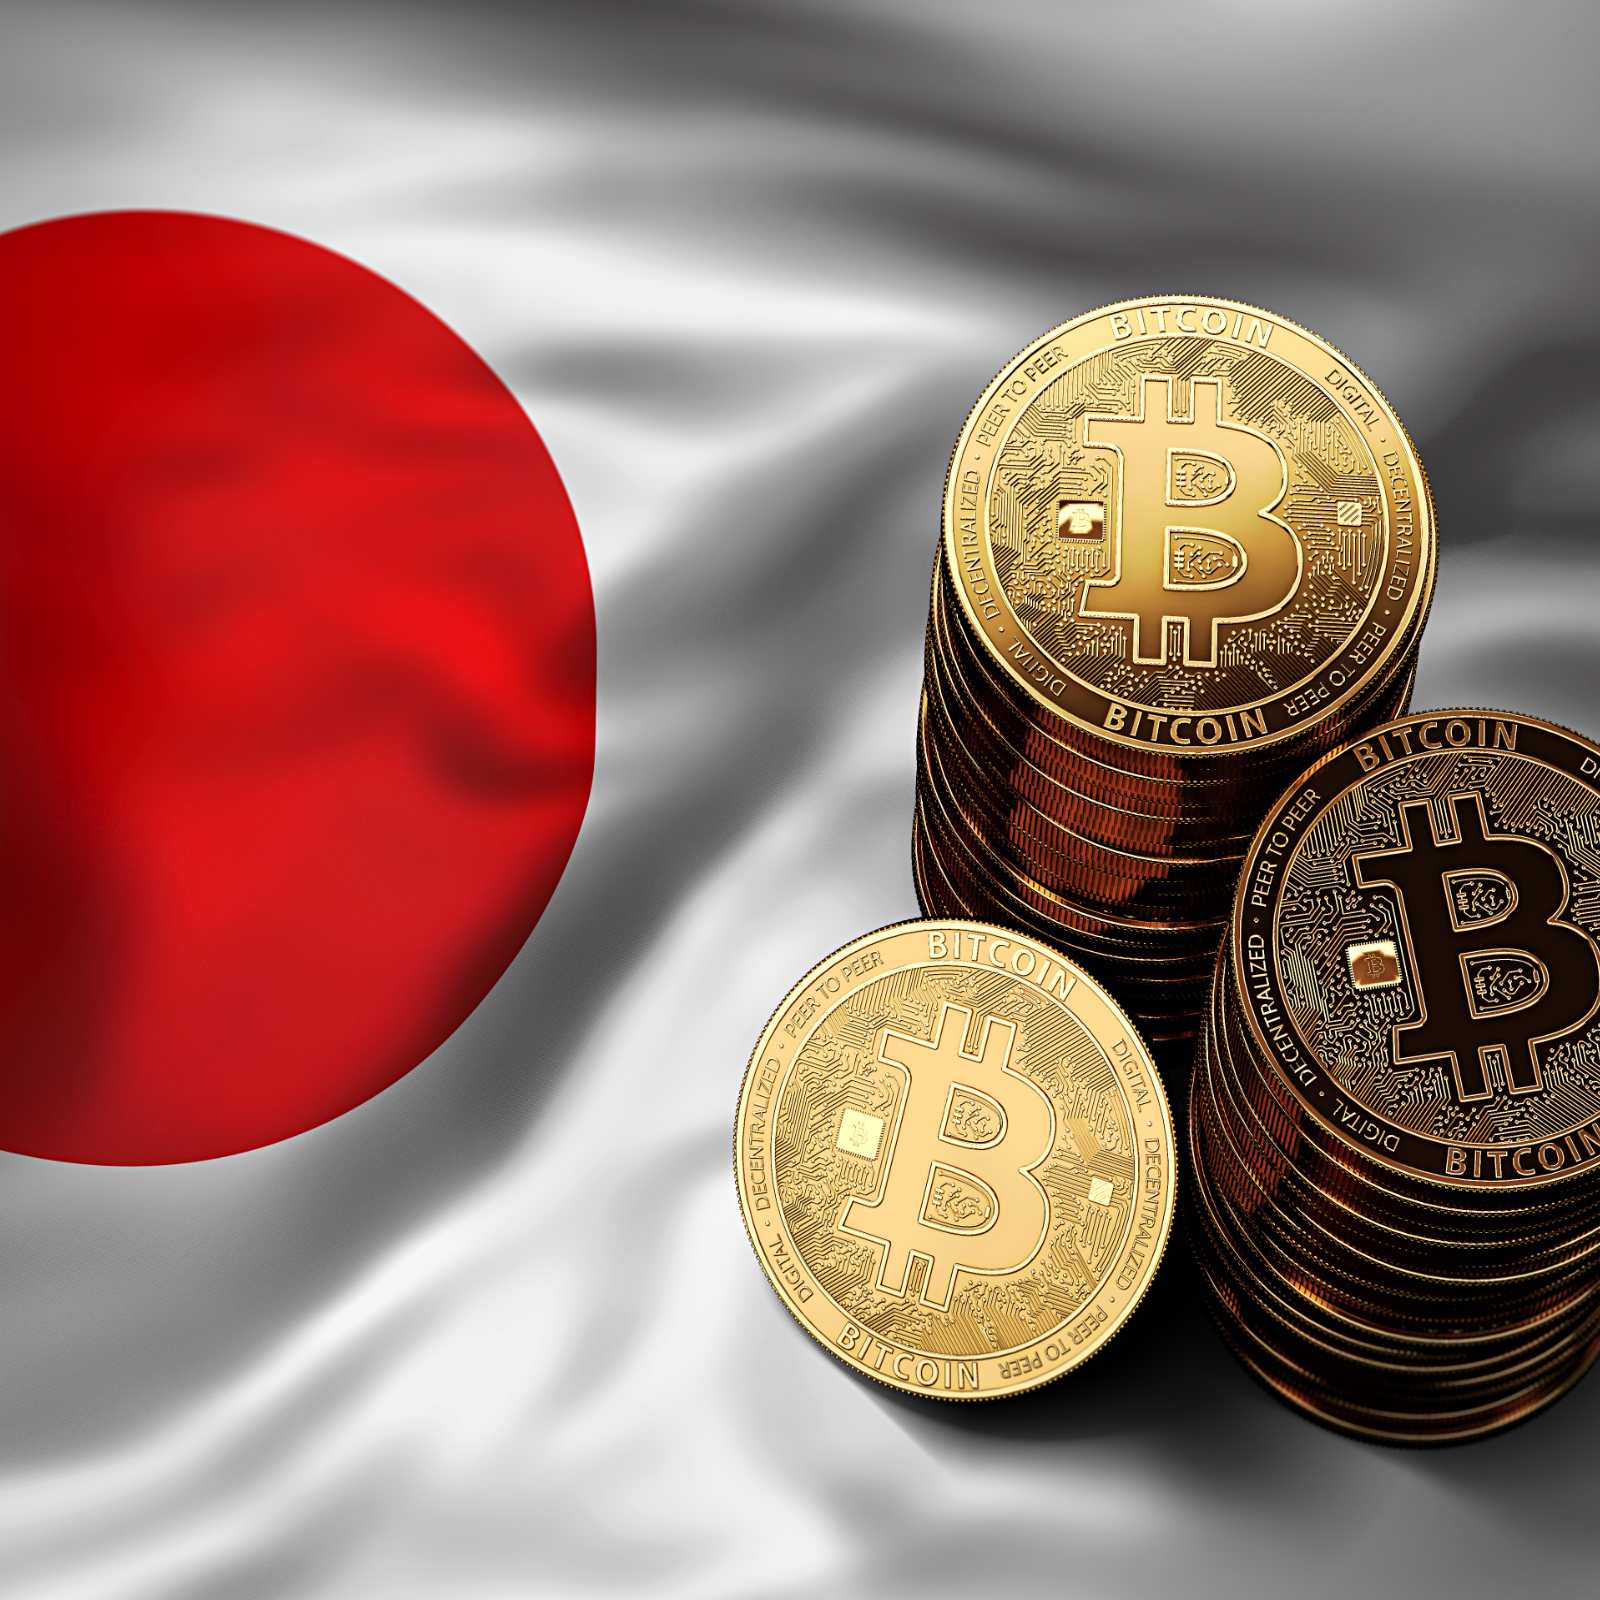 Japanese Financial Authority Clarifies Policy on Cryptocurrencies and ICOs